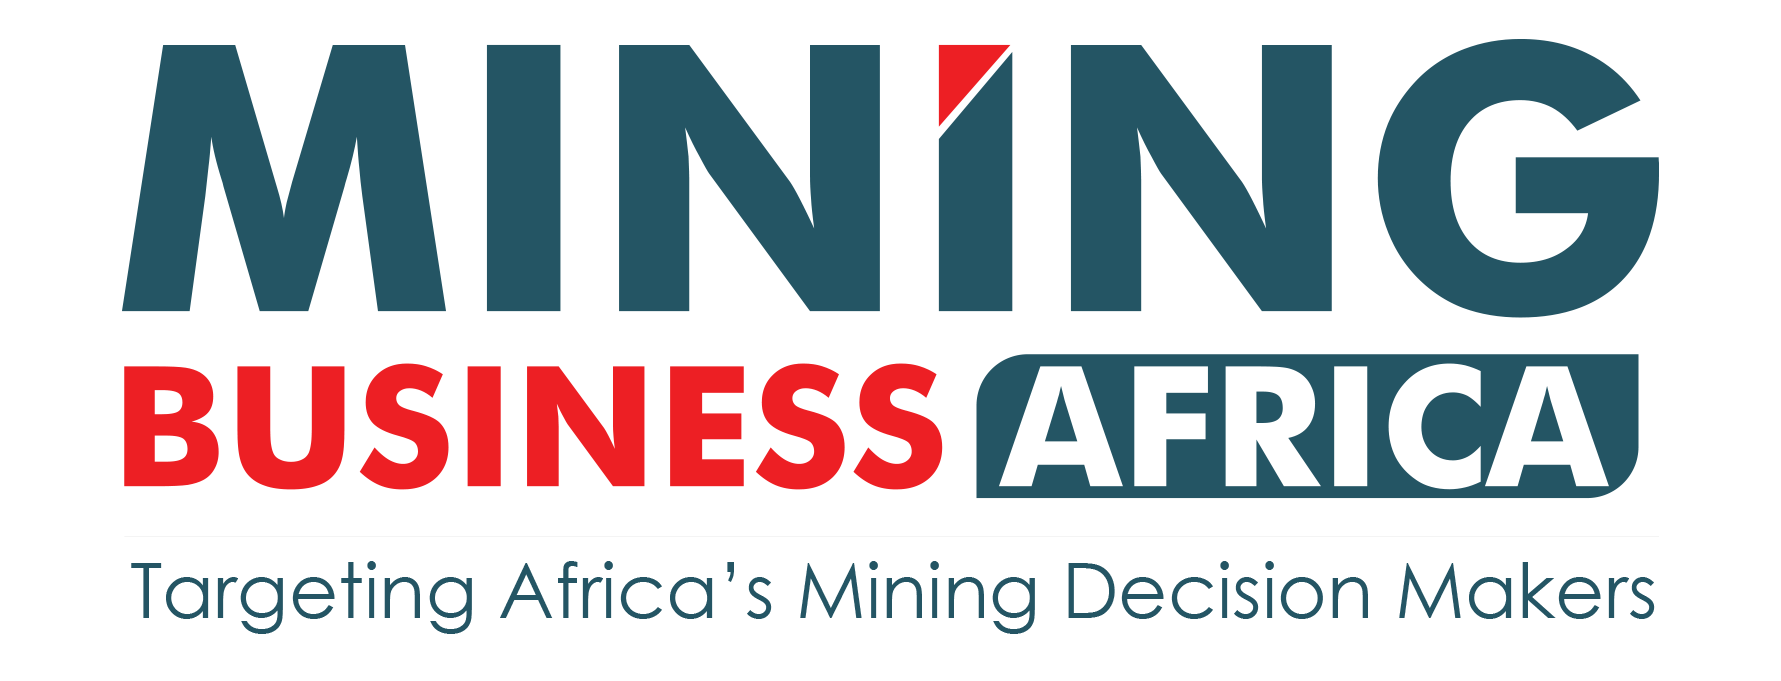 Mining Bussiness Africa Masthead.Png To Be Used 1